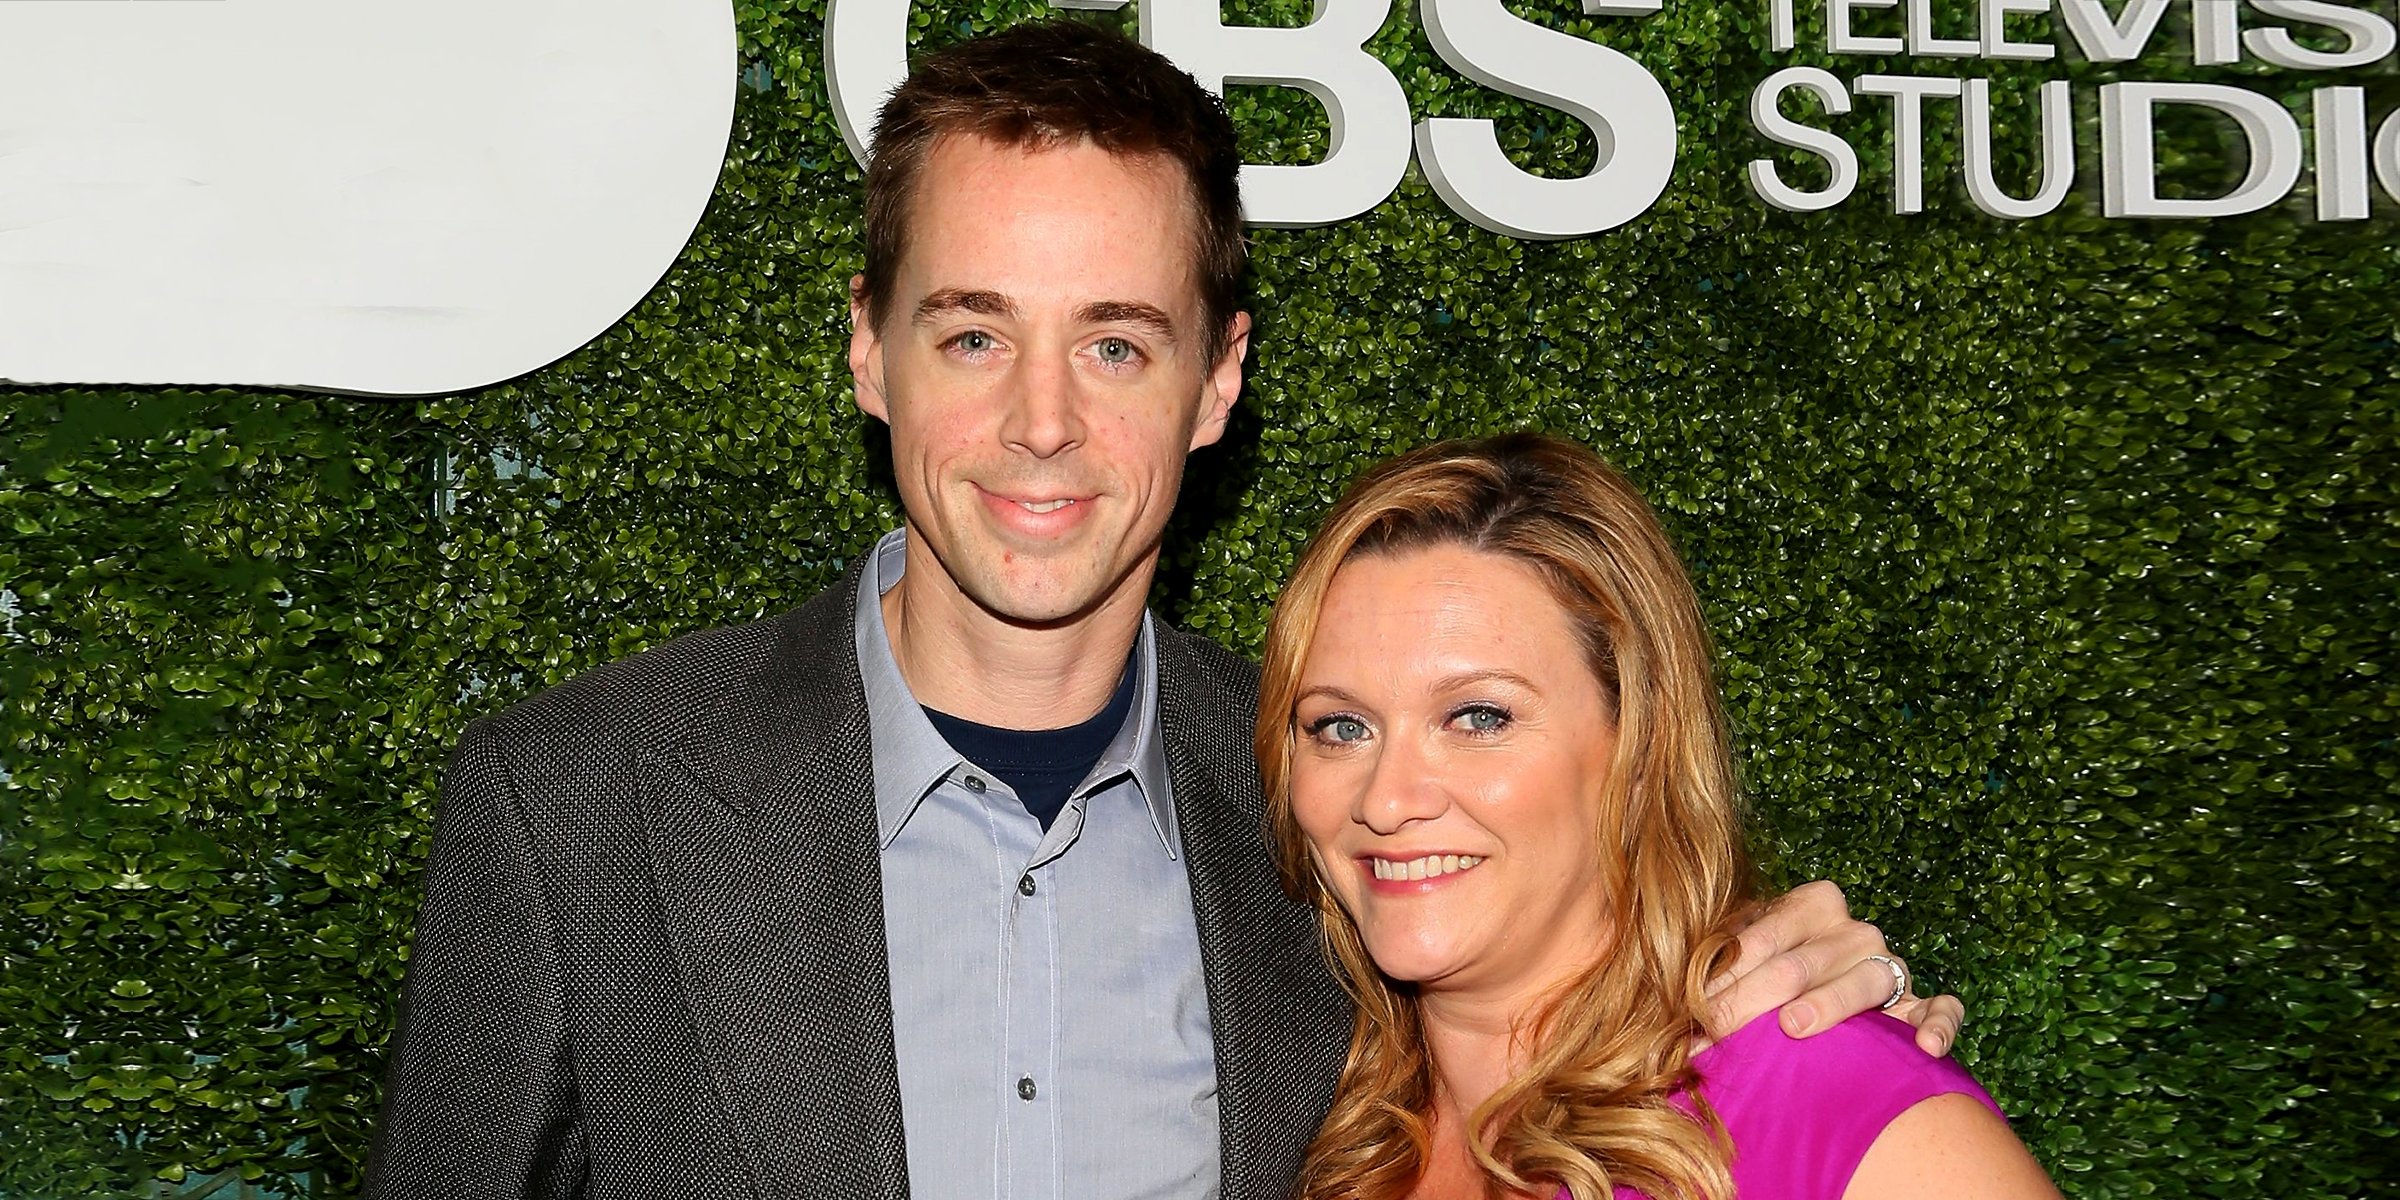 Sean Murray' and Carrie James. | Source: Getty Images